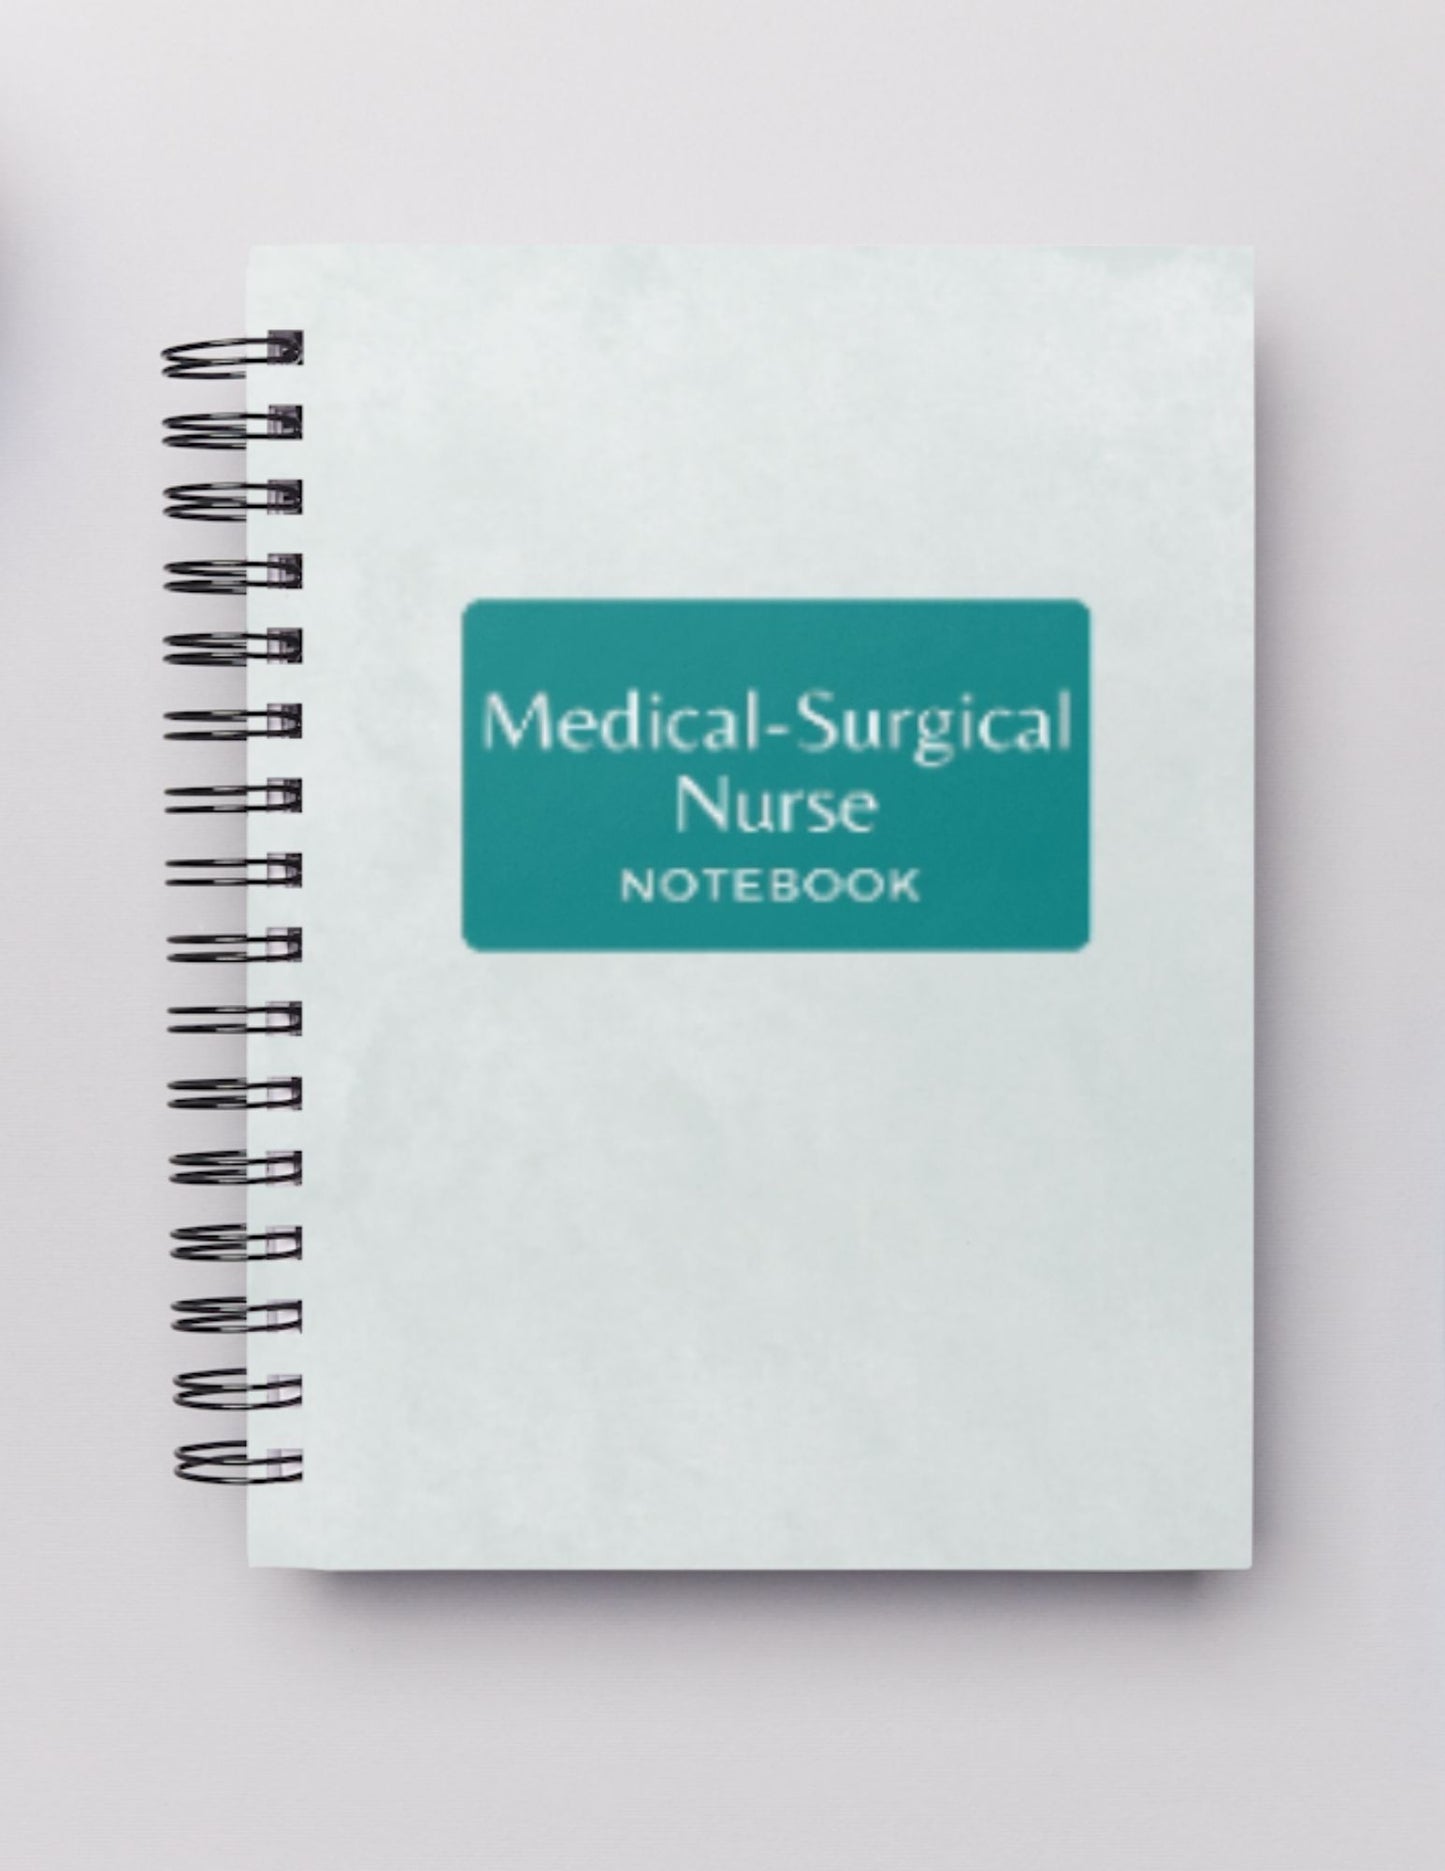 Medical-Surgical (1 patients) Nurse Report Notebook